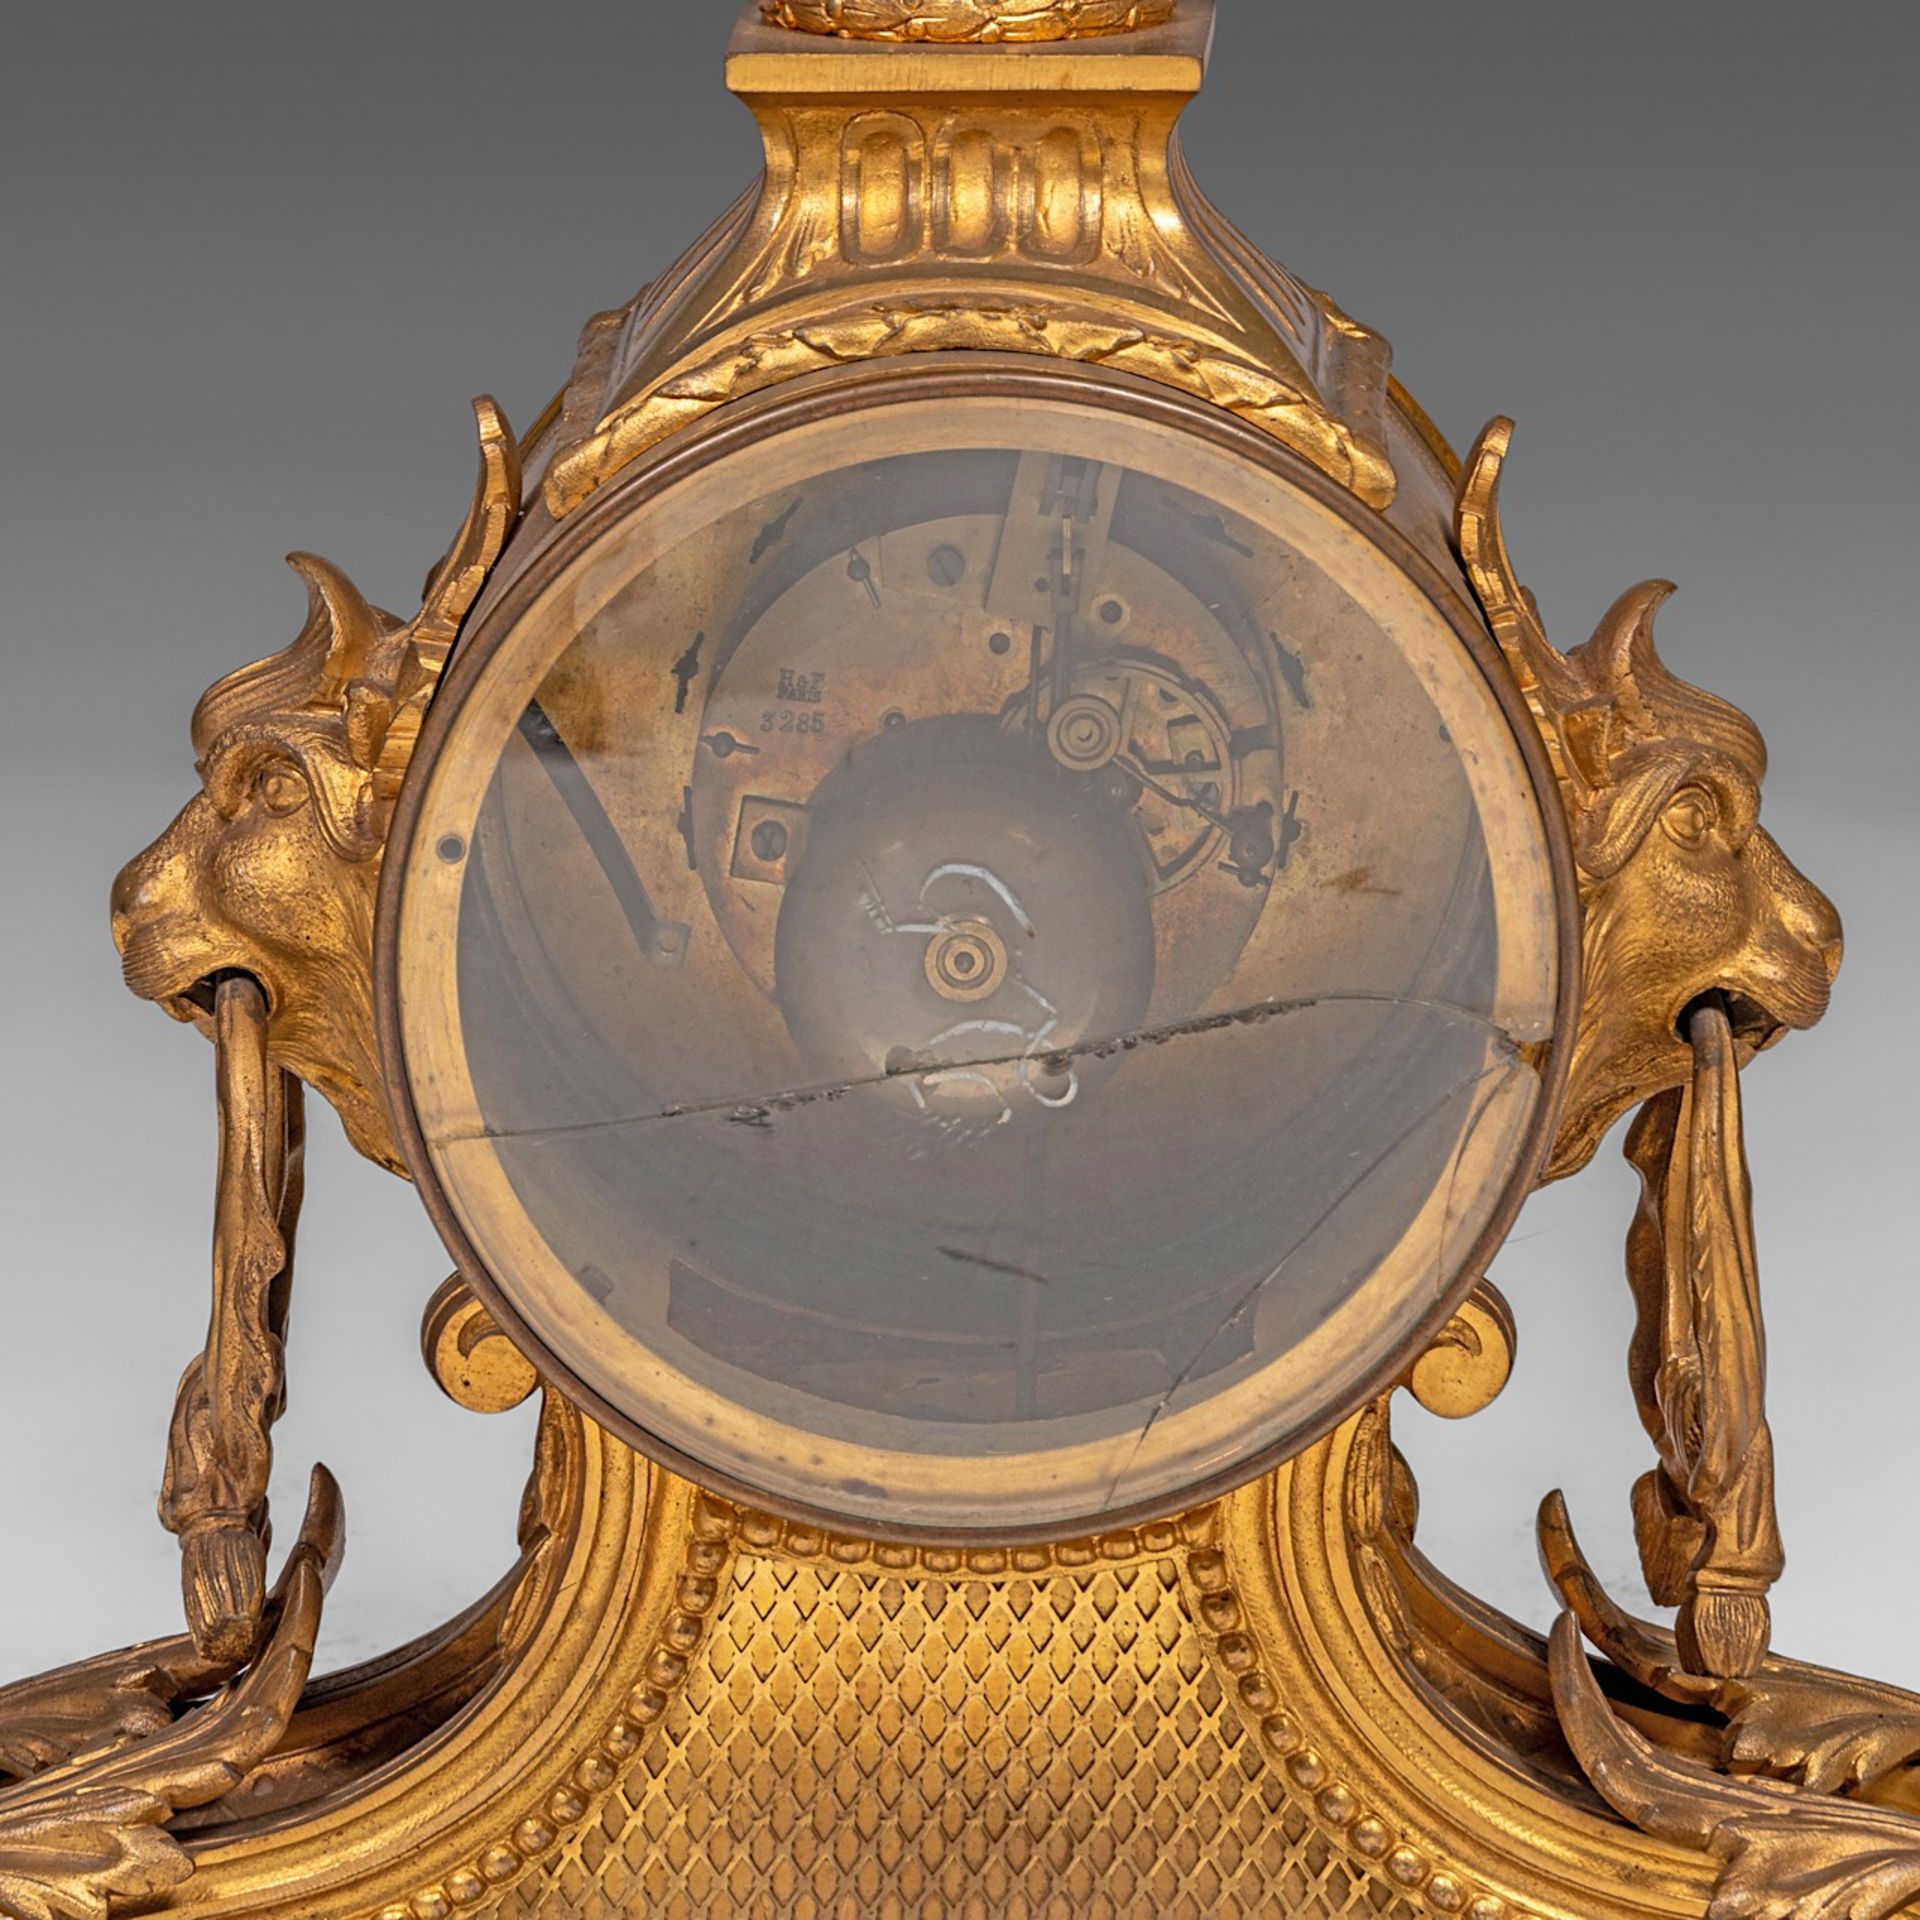 A three-piece Neoclassical gilt bronze mantle clock, H 50 - 65 cm - Image 5 of 6